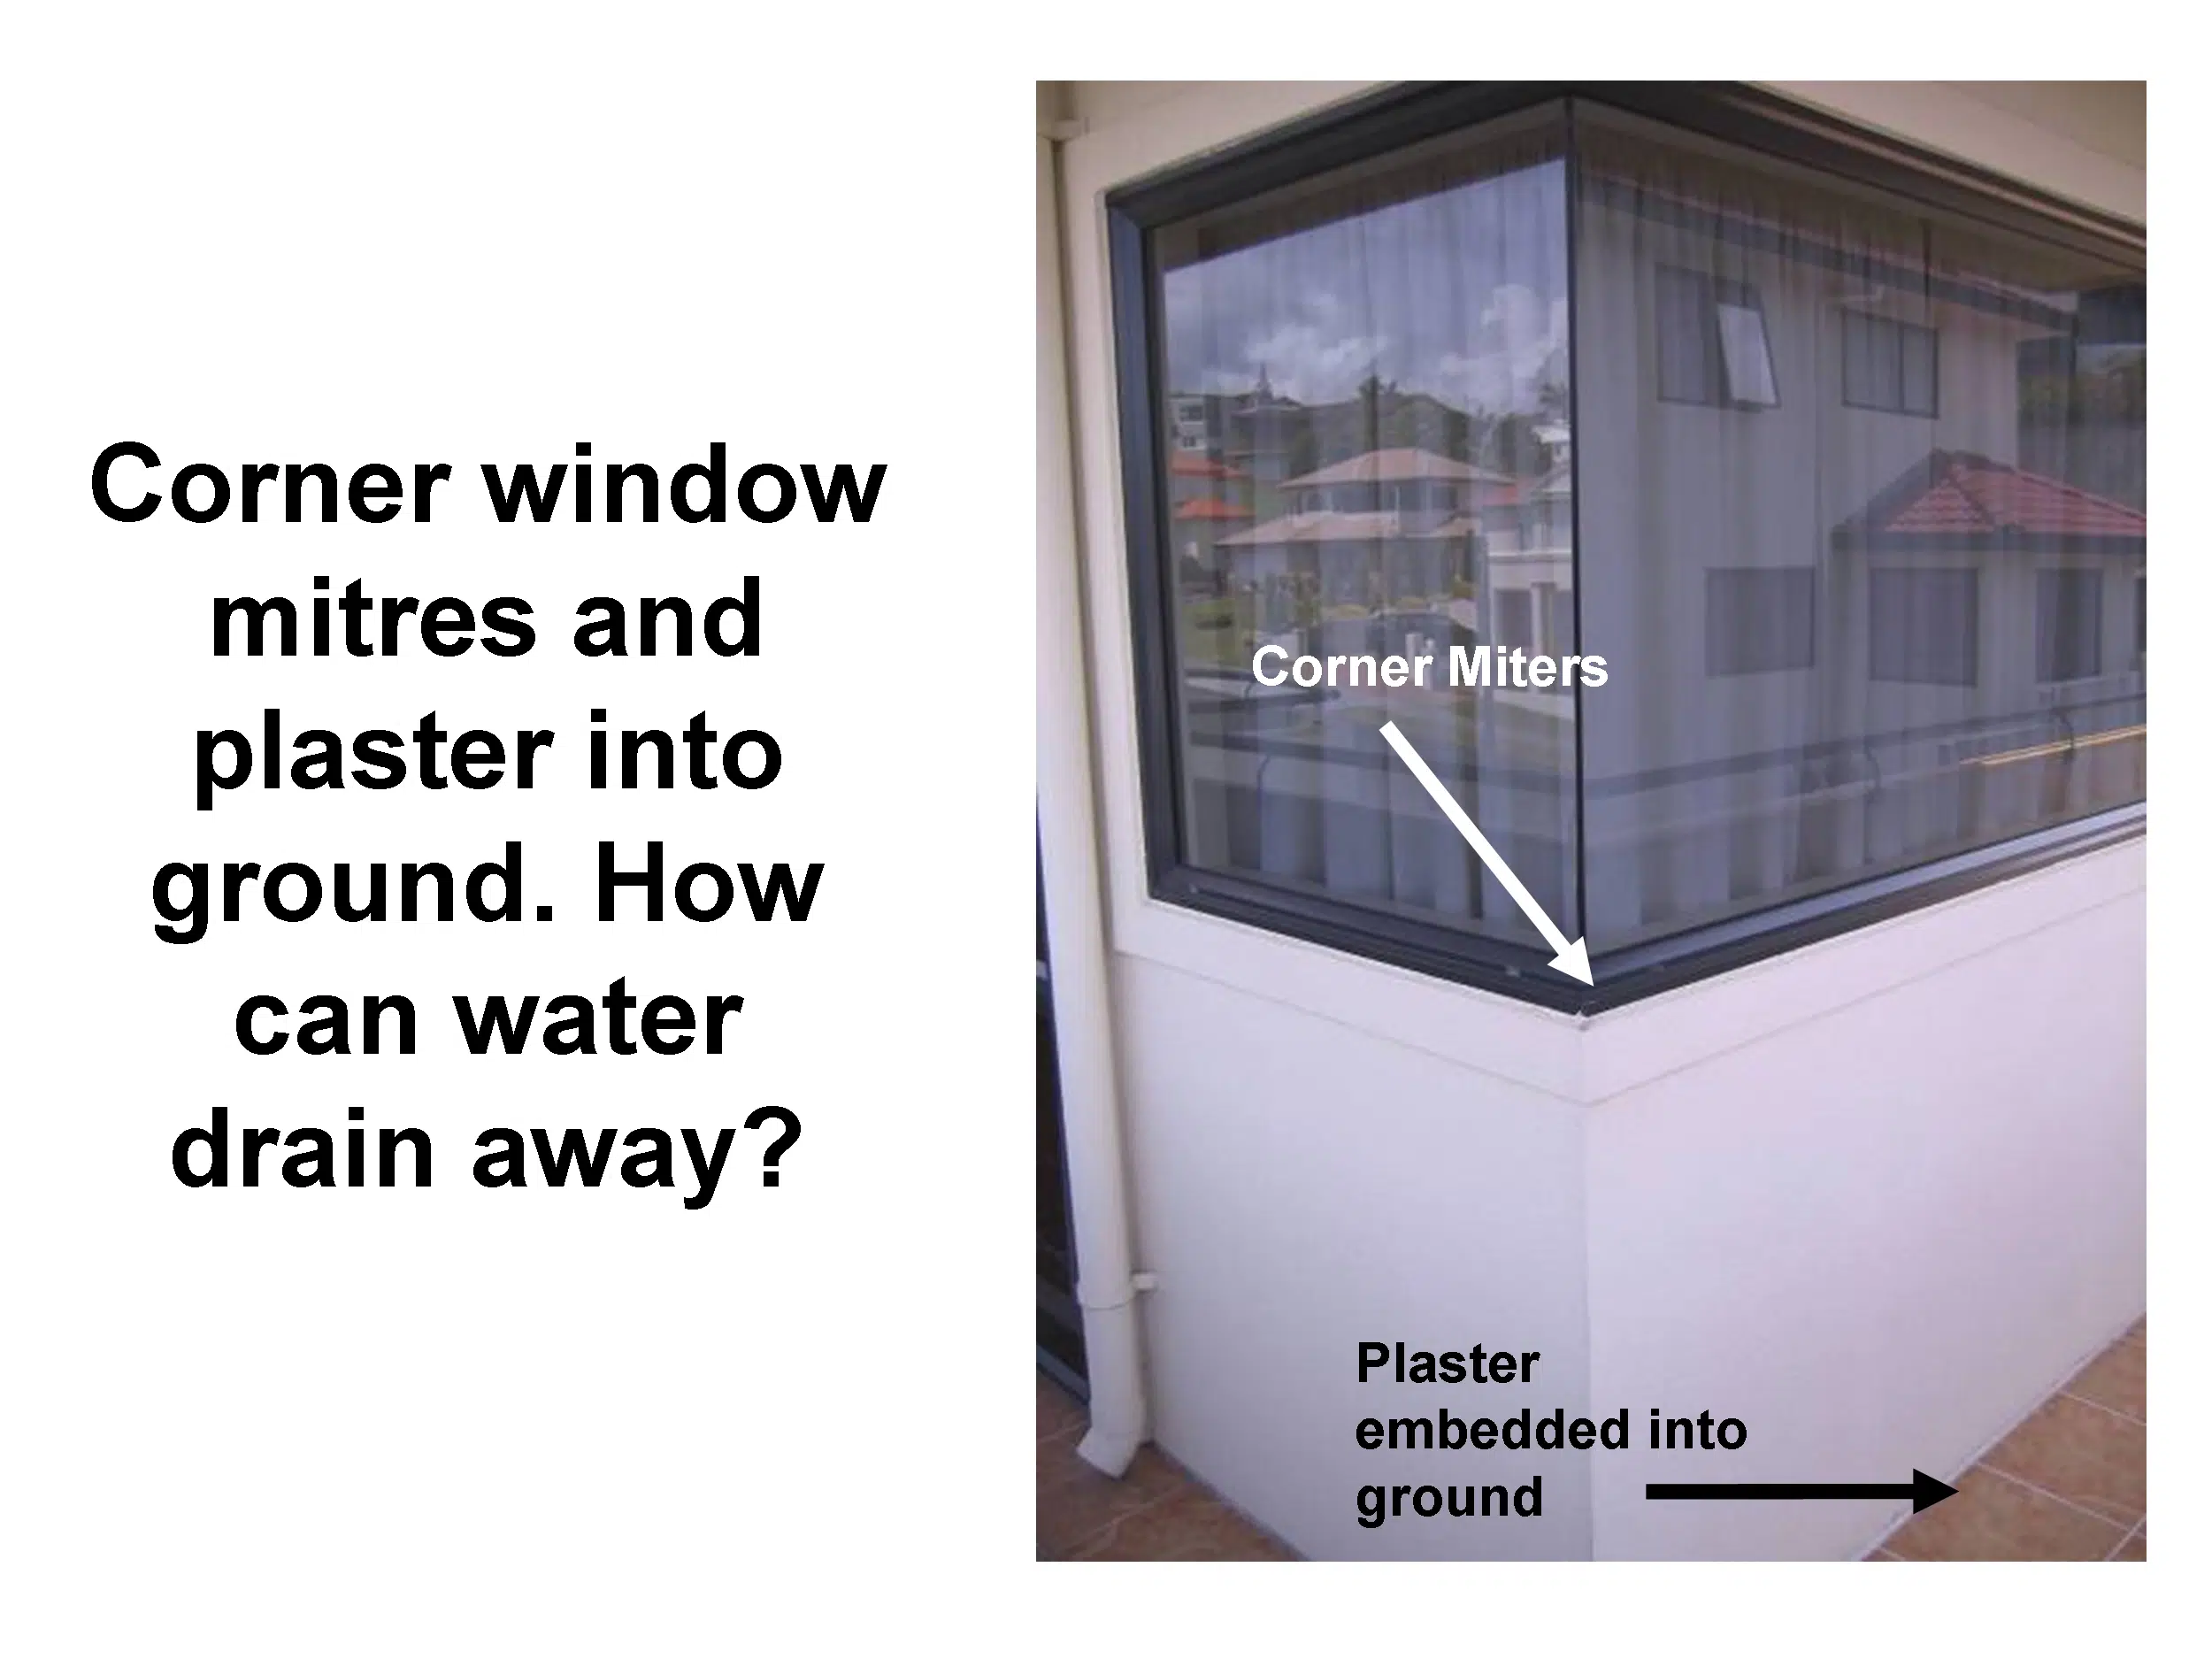 Plaster home cladding buried in the ground and corner windows are frequent causes of leaks in houses with monolithic cladding